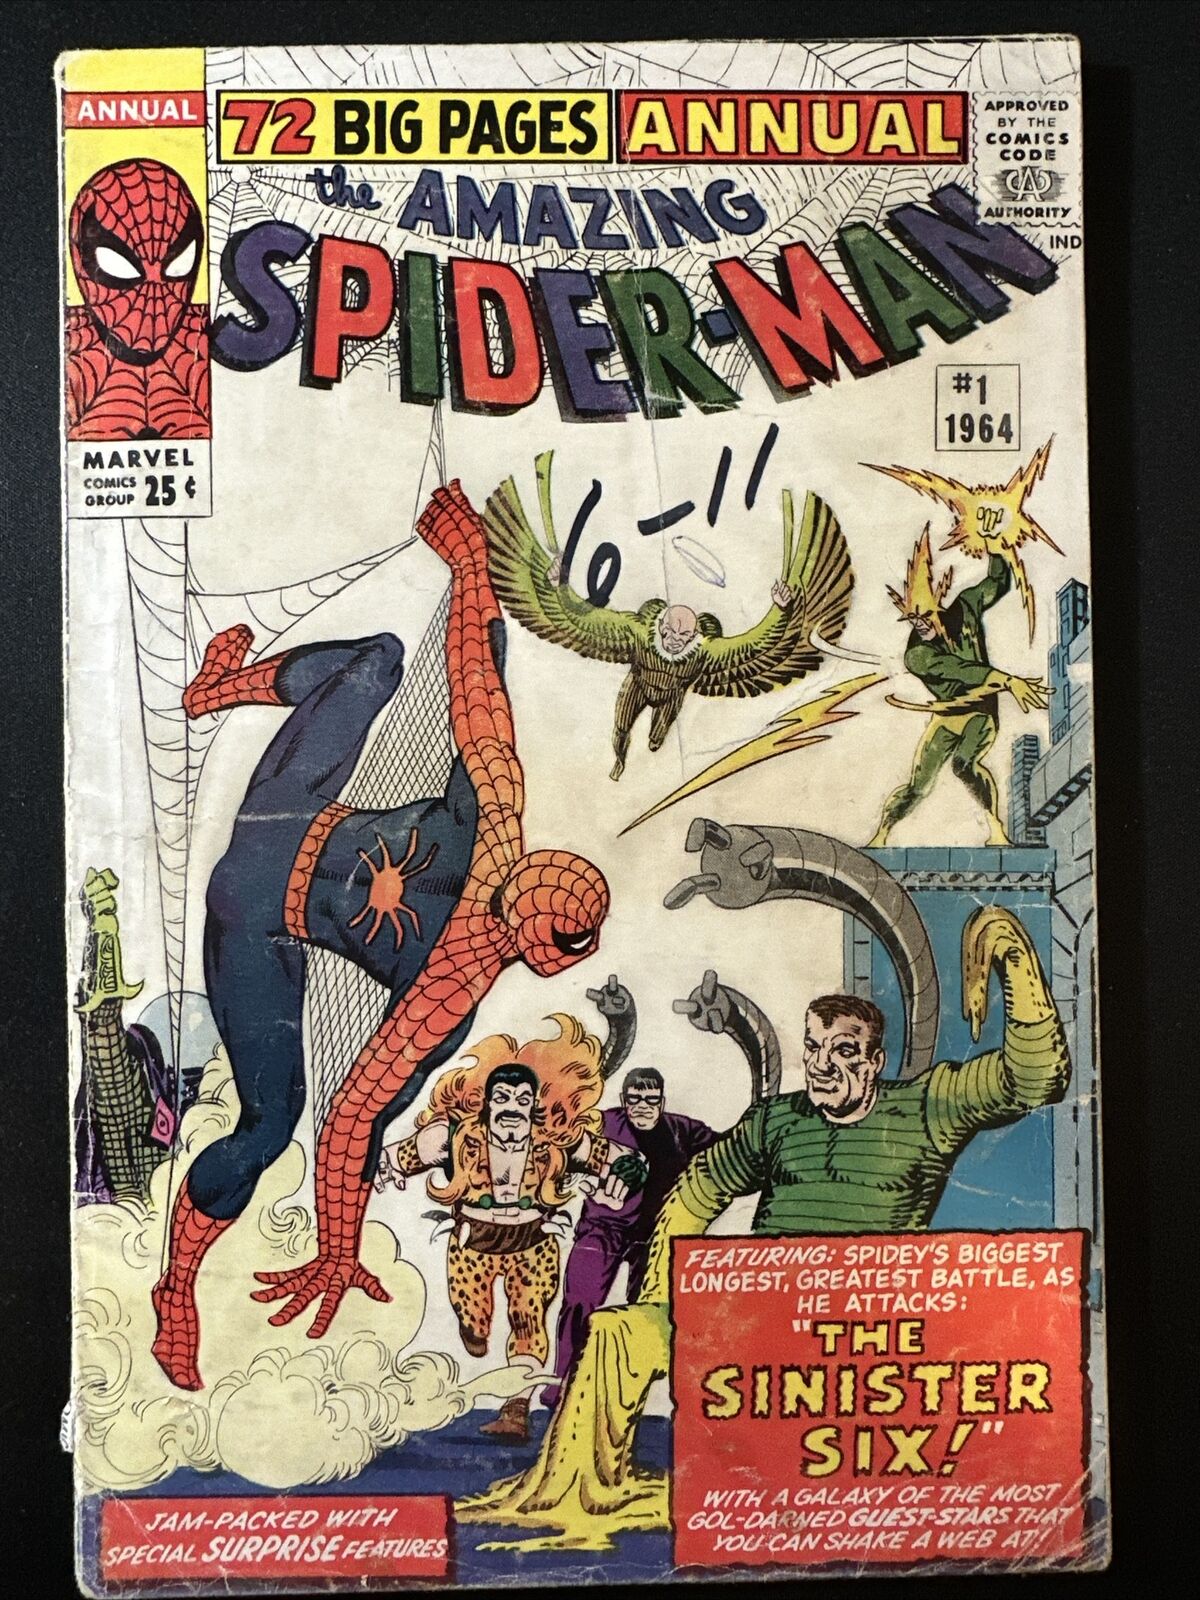 The Amazing Spider-Man Annual #1 1964 Marvel Comics 1st Print Silver Age Good